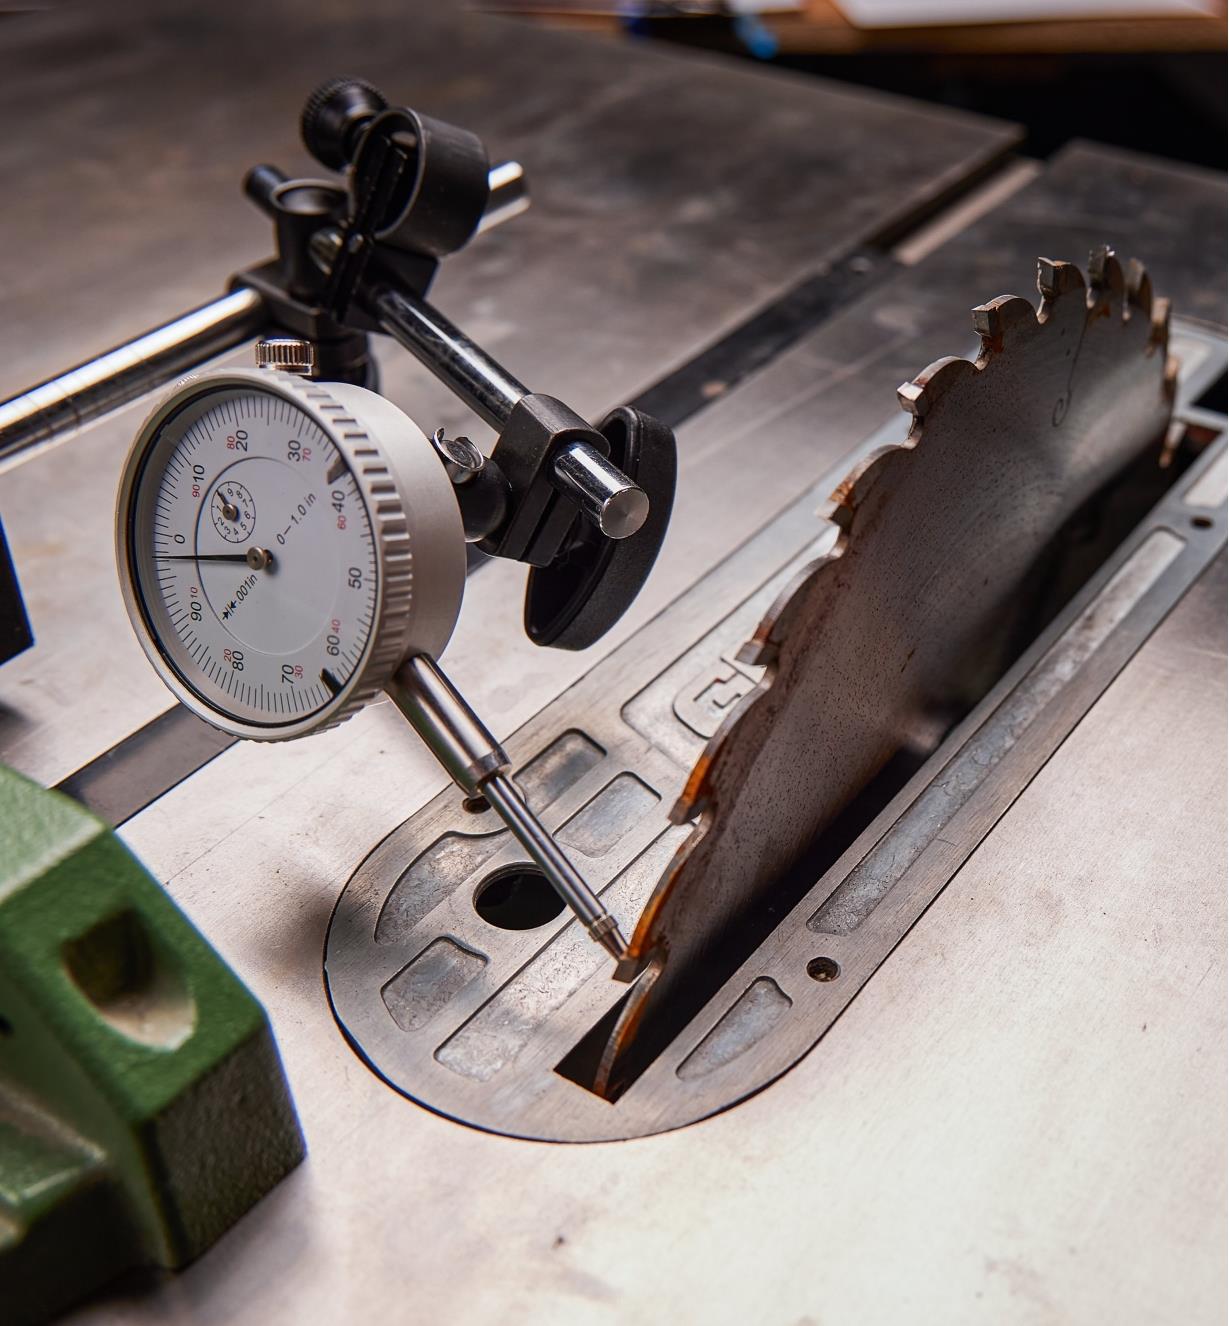 A dial indicator on a magnetic base being used to check a blade on a table saw